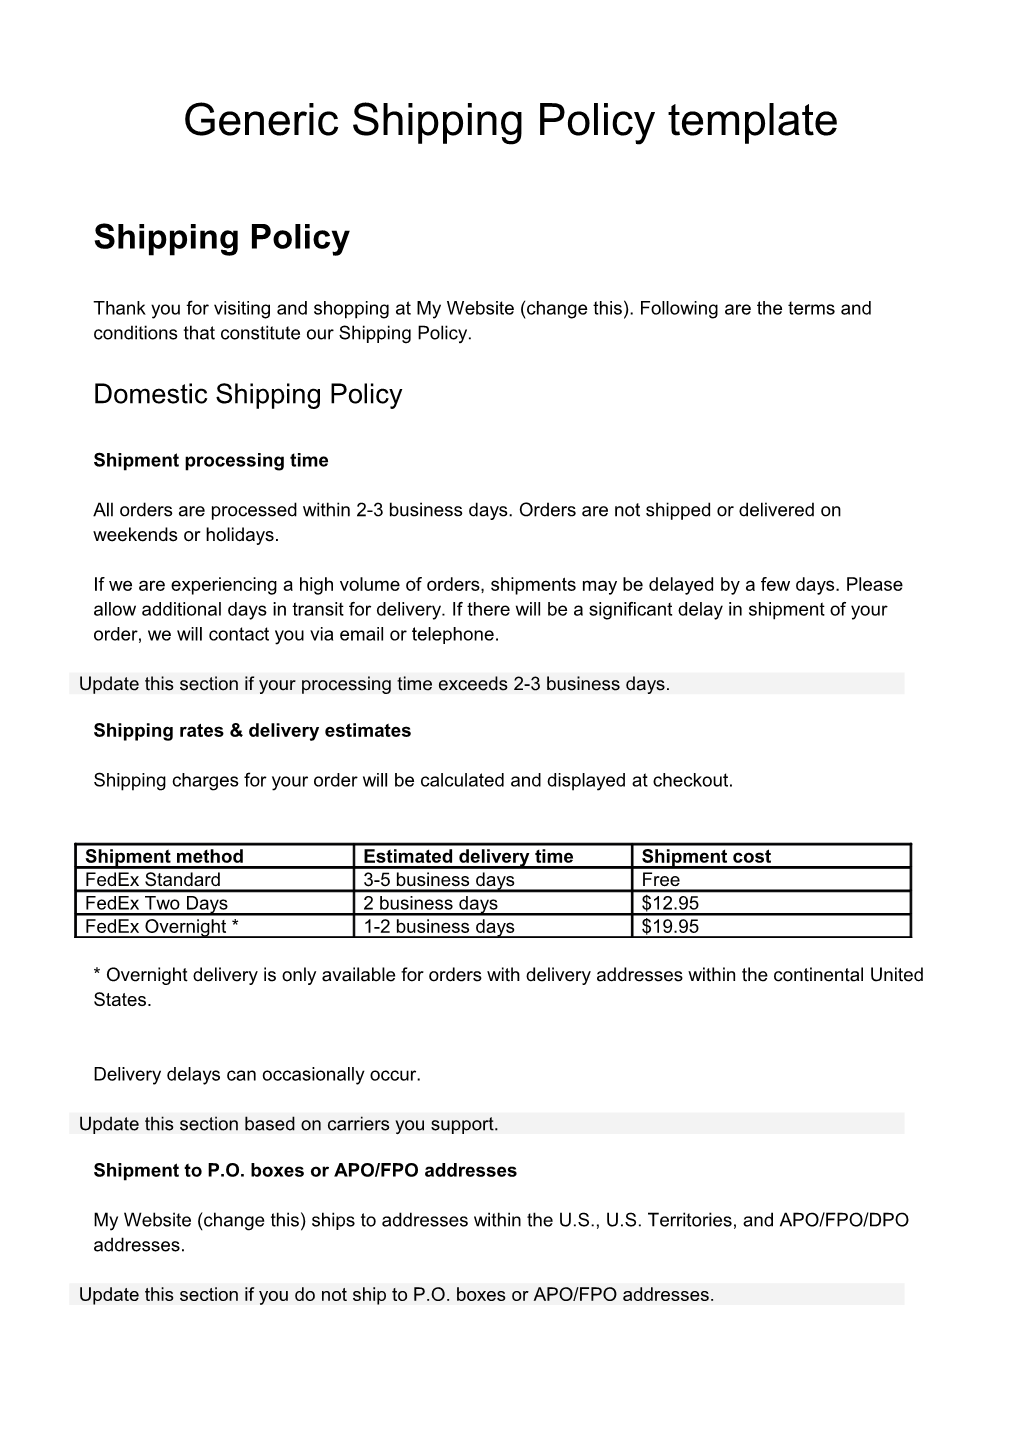 Generic Shipping Policy Template